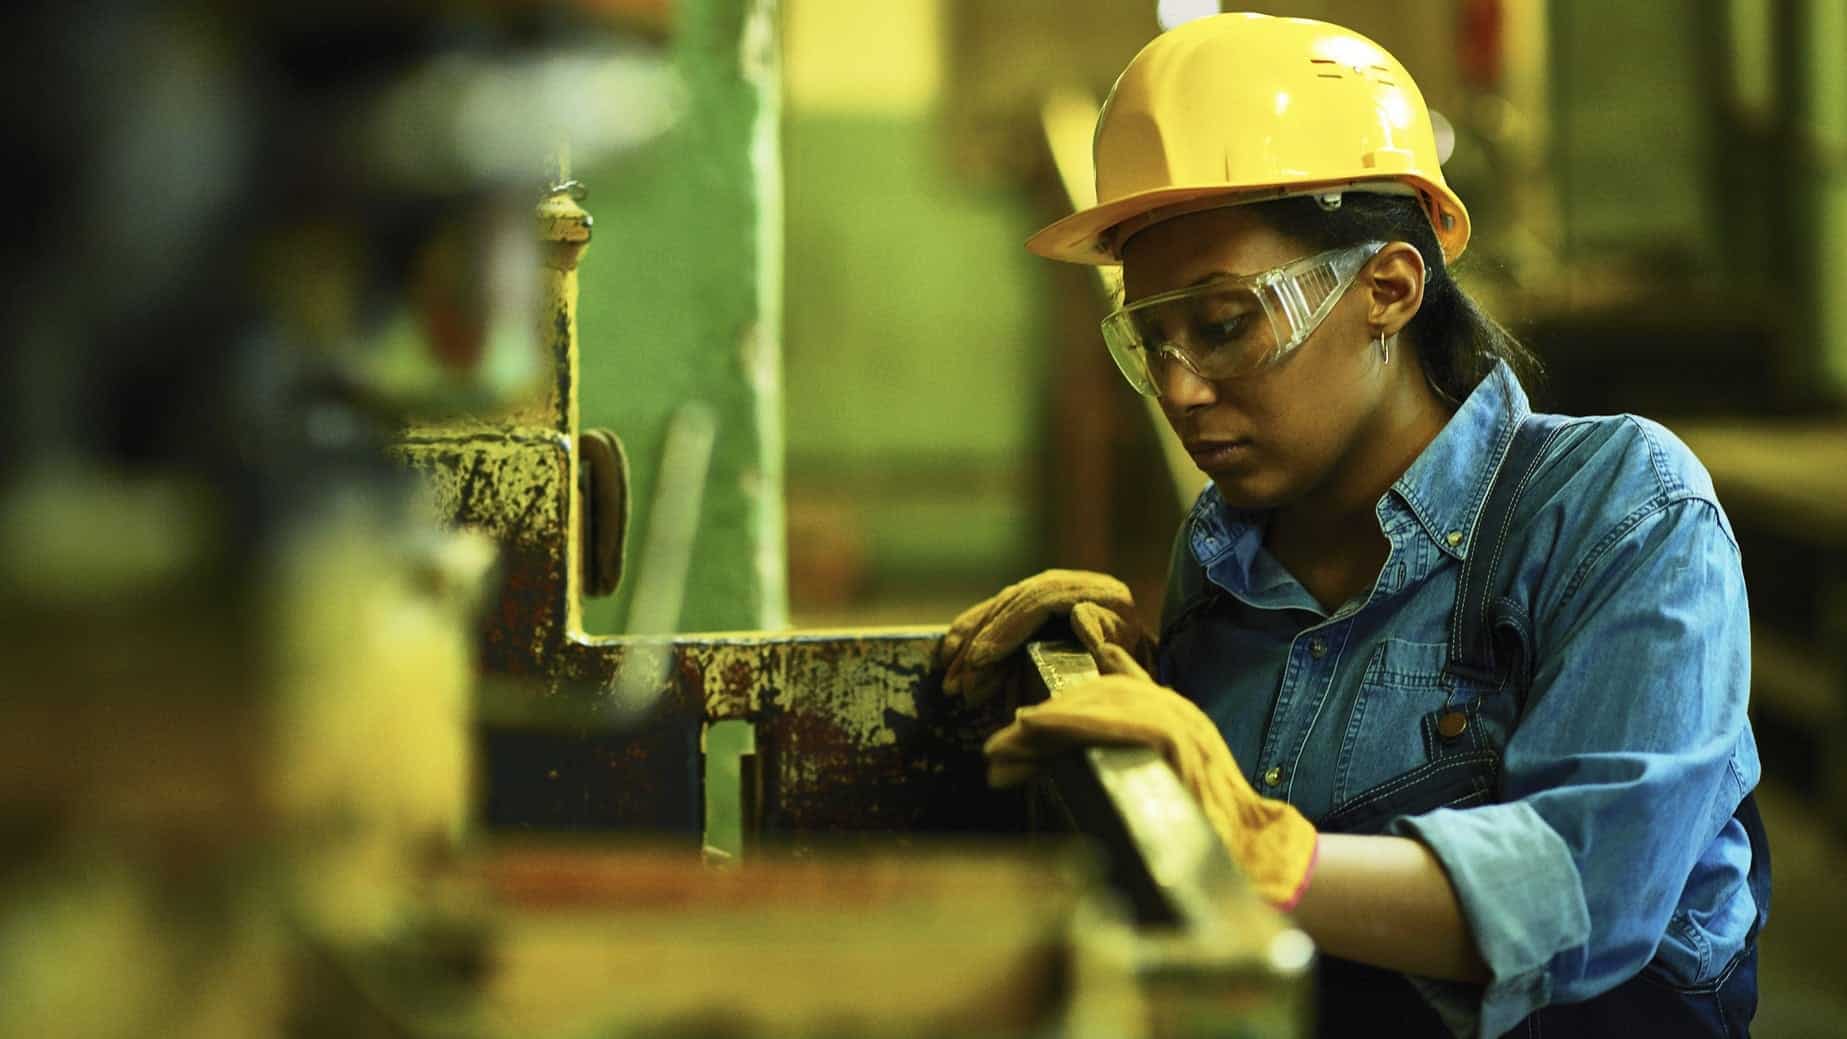 Female Worker In A Hard Hat Stock Photo